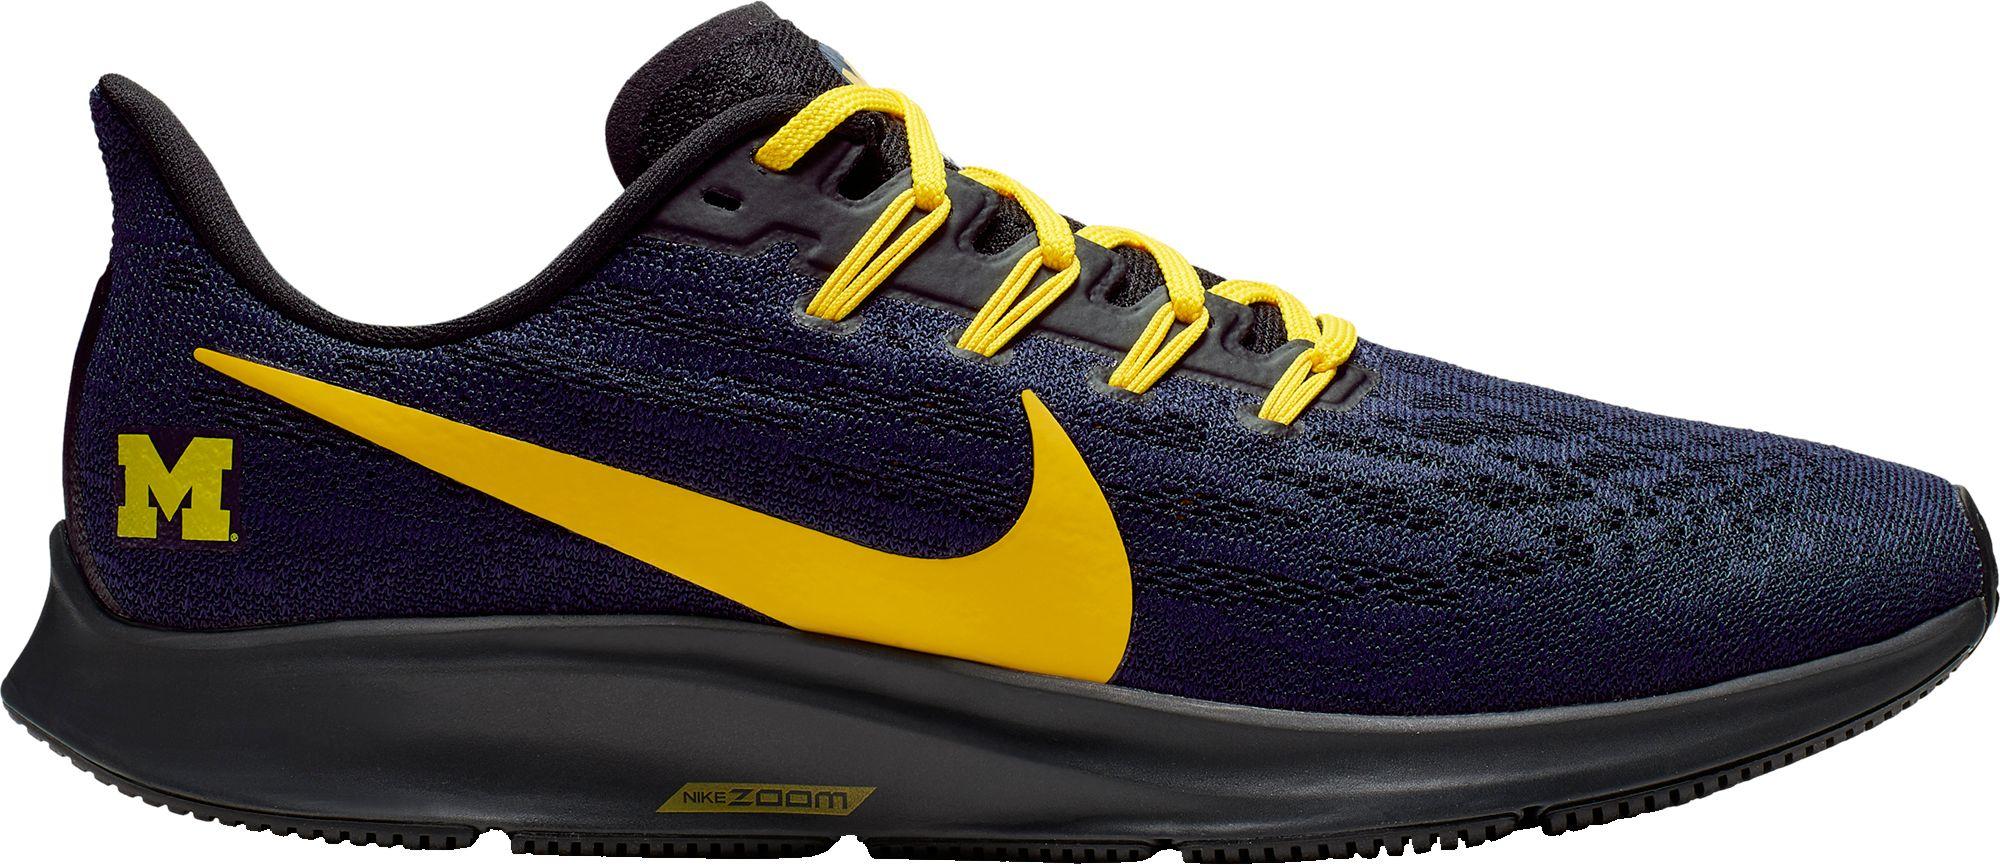 Nike Michigan Air Zoom Pegasus 36 Running Shoes in Navy/Gold (Blue) for Men  - Lyst